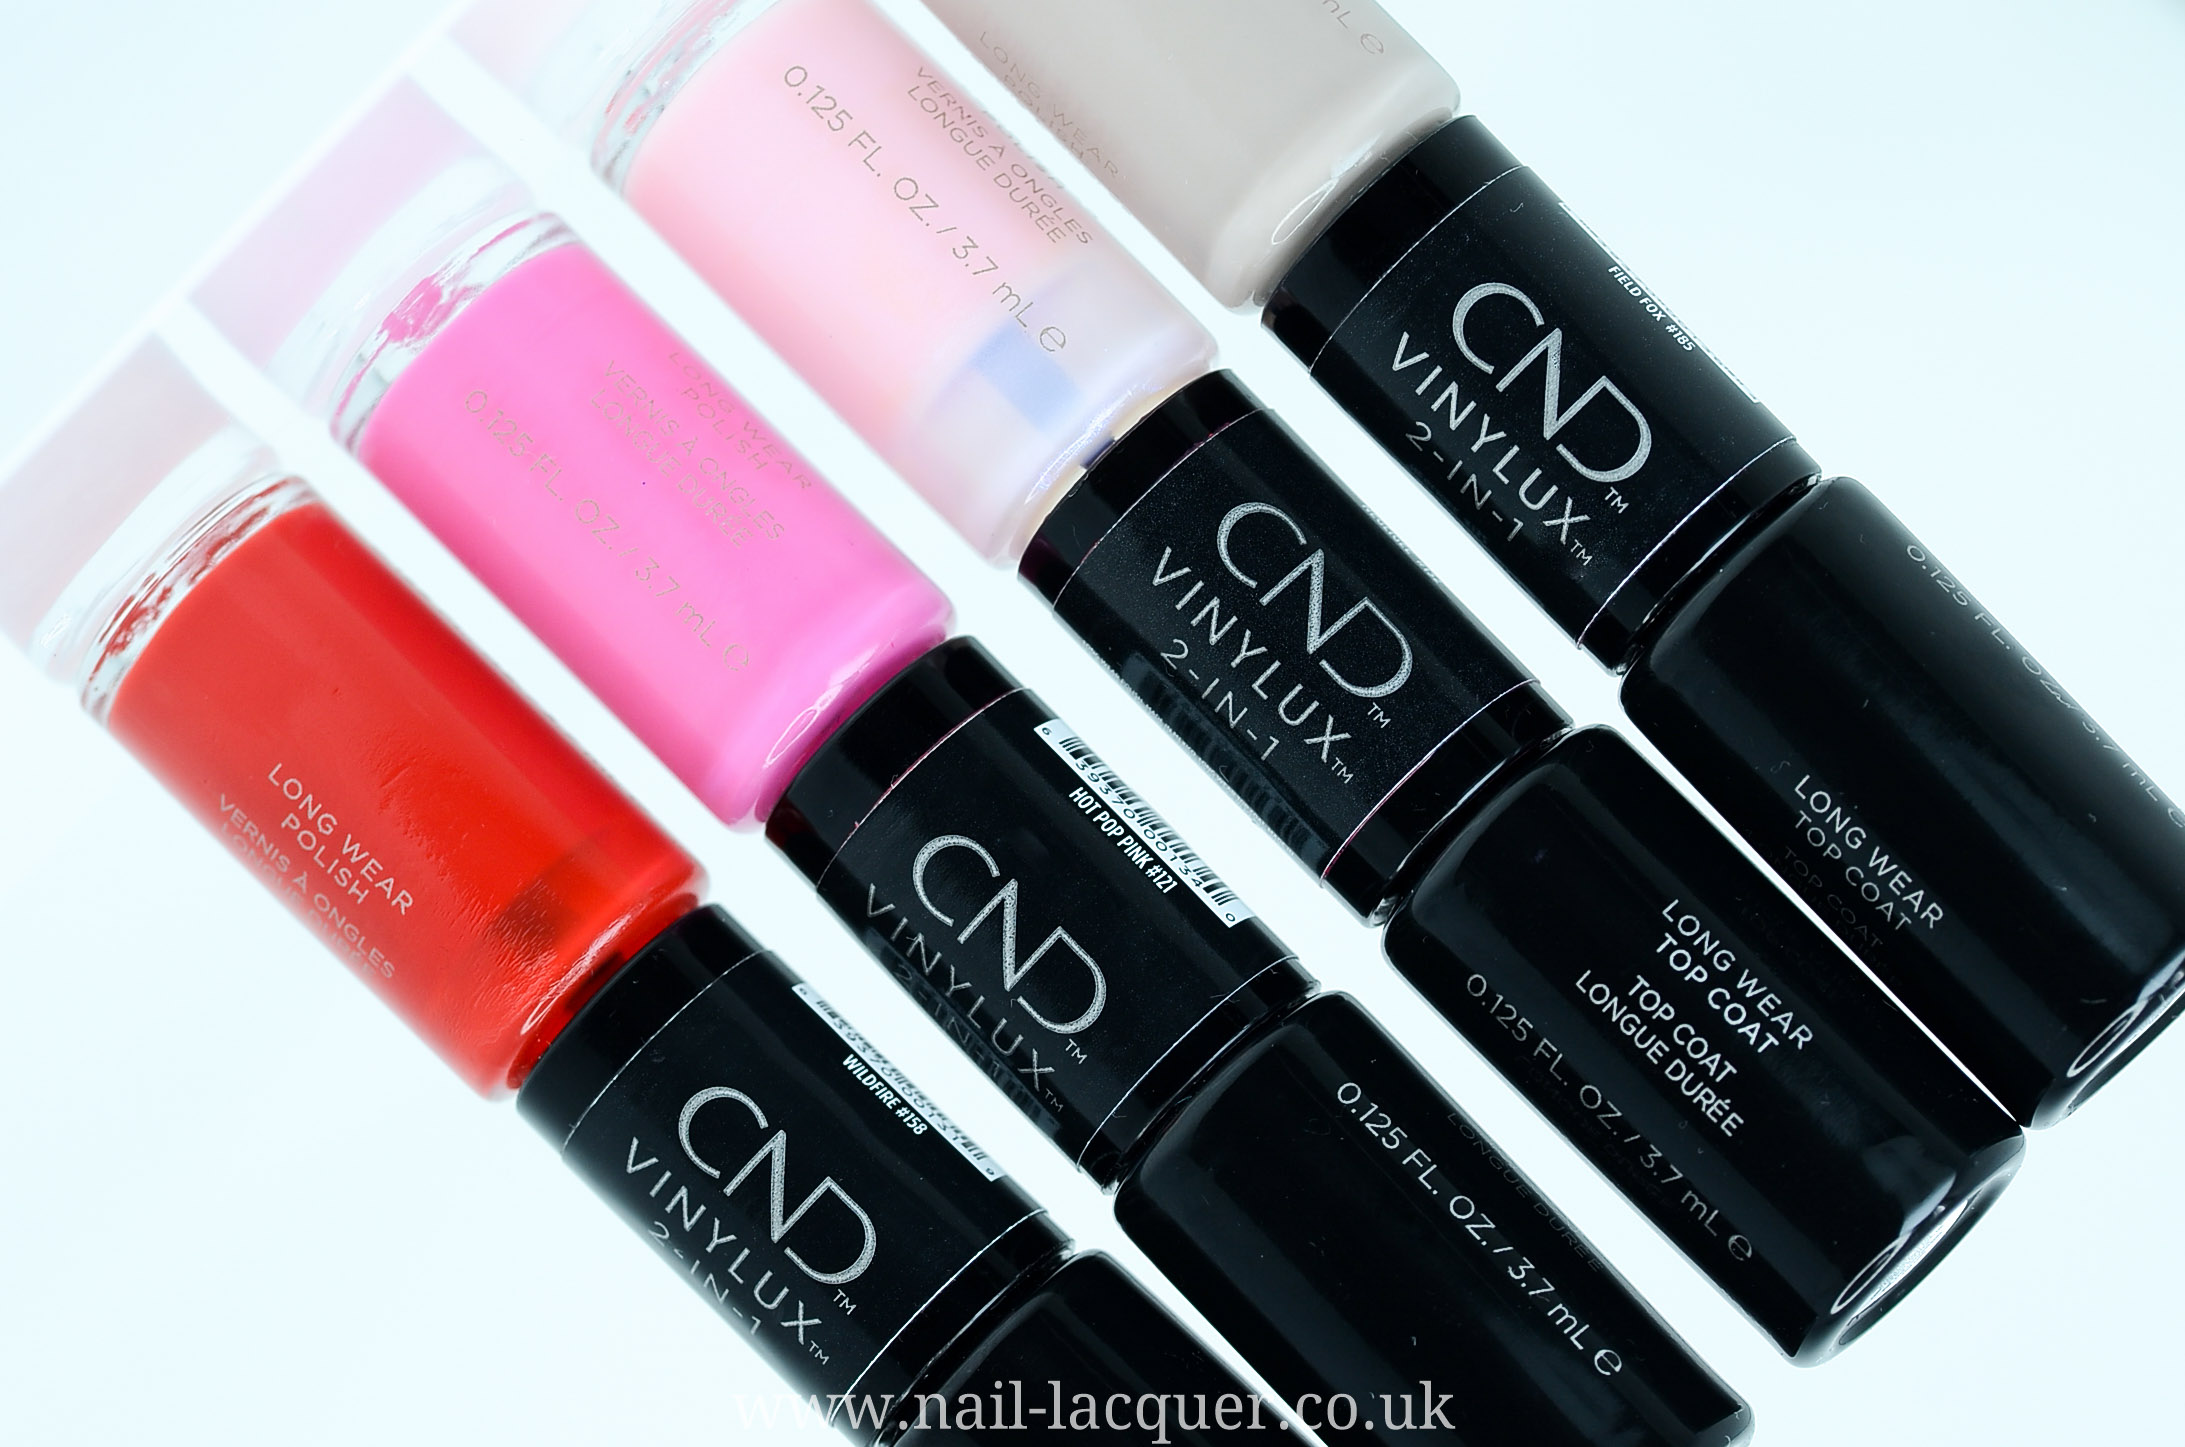 10. CND Vinylux Long Wear Nail Polish in "Soul Mate" - wide 2